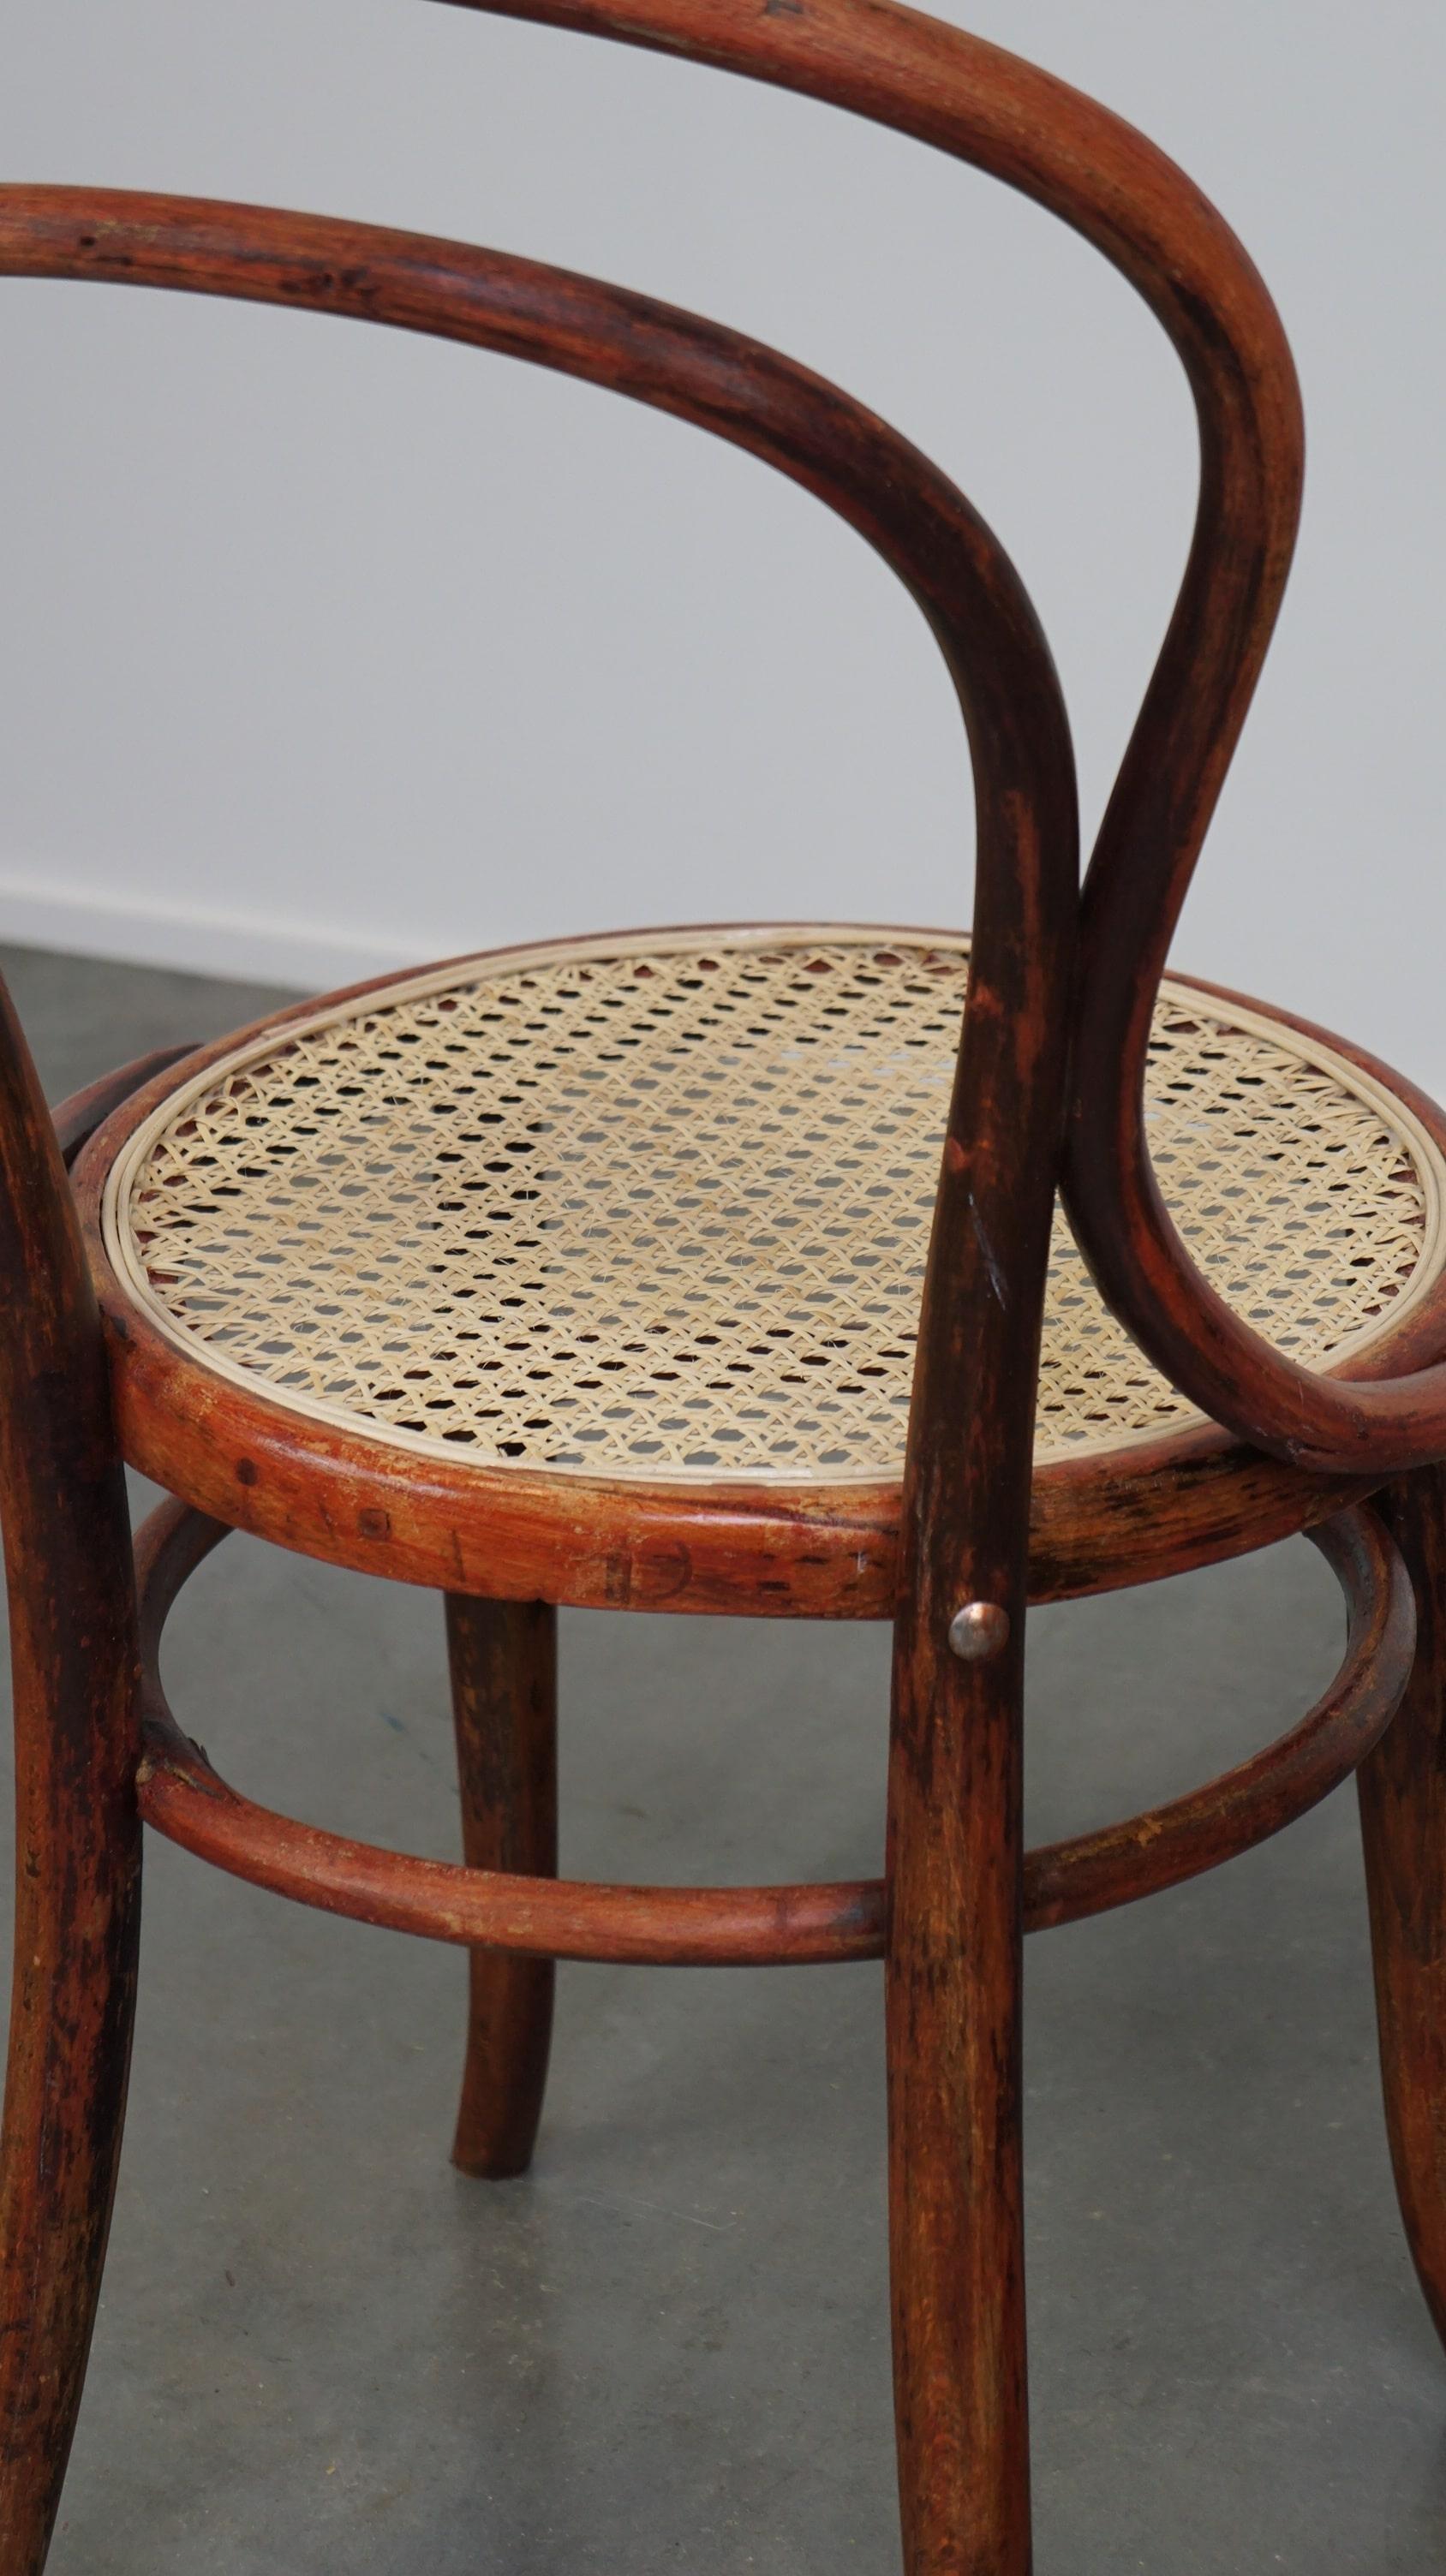 Original antique Thonet chair no. 14 with a beautiful patina and a new matte sea For Sale 3